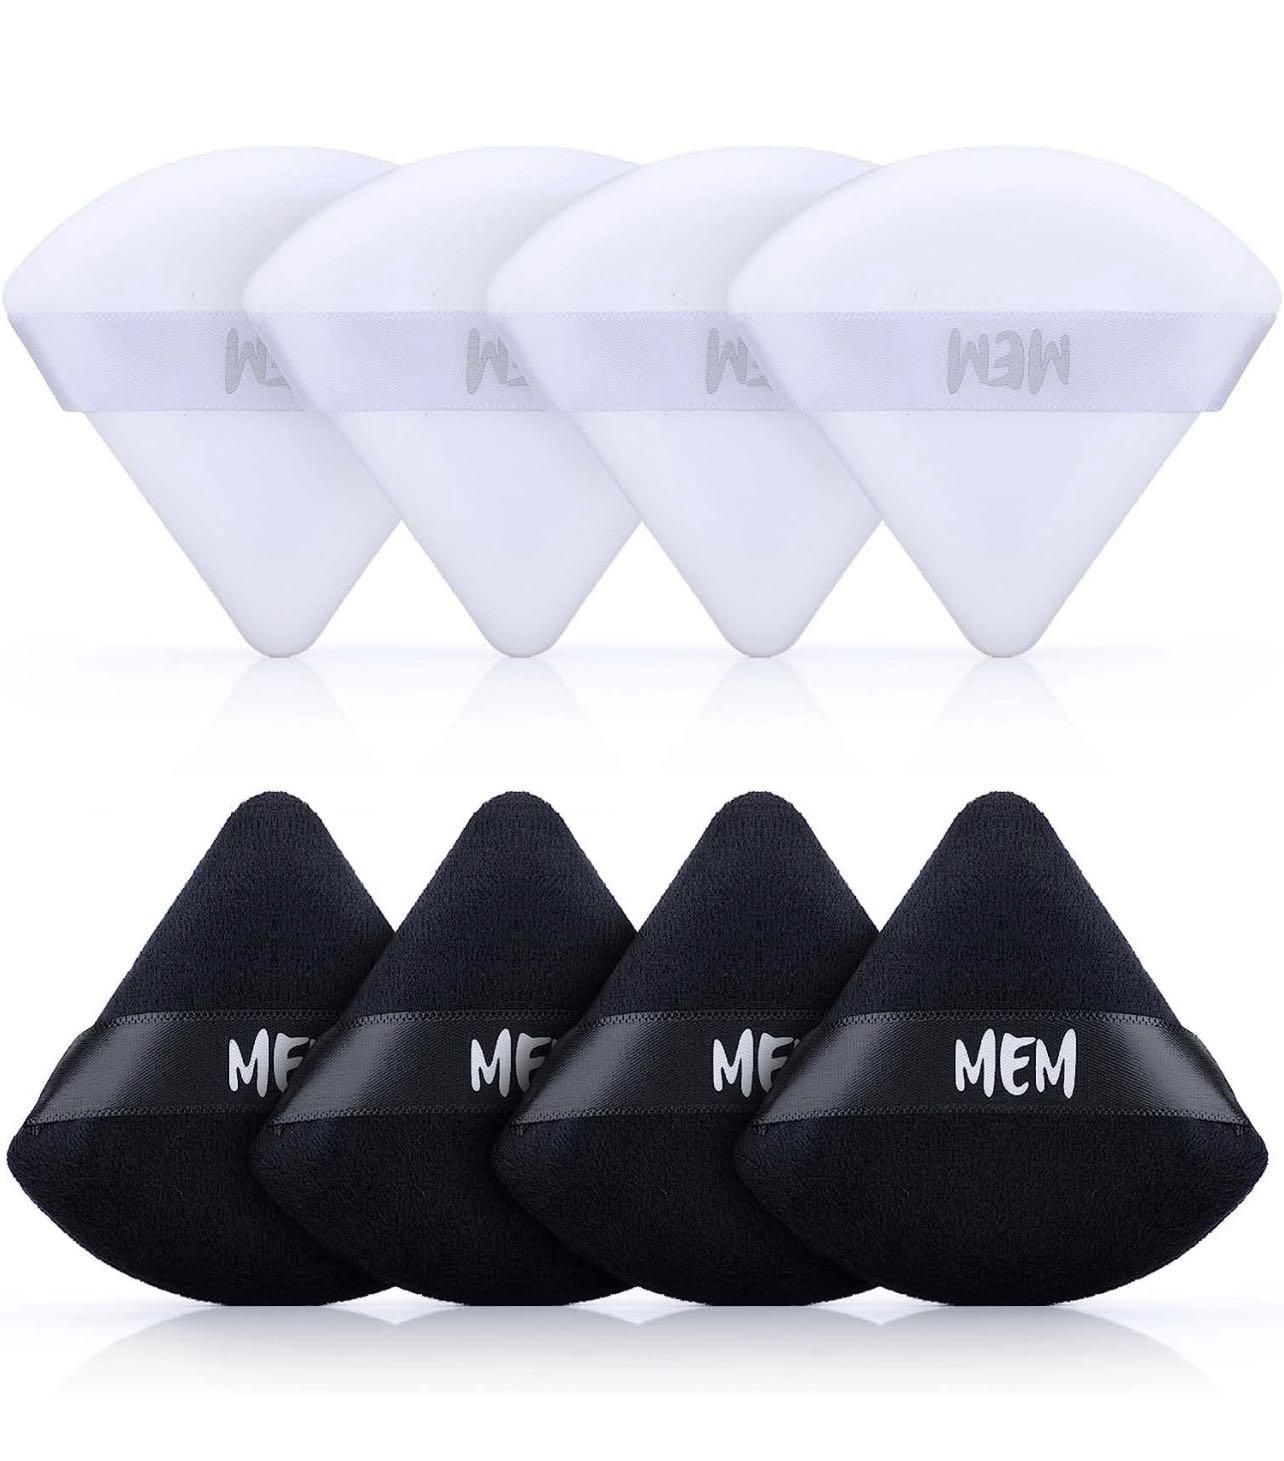 2 sets MEM Triangle Powder Puff - 8 Pcs Soft Velour Makeup Puffs for Face Powder Loose Powder Application, Wet and Dry Use, Sponge Beauty Makeup Tools